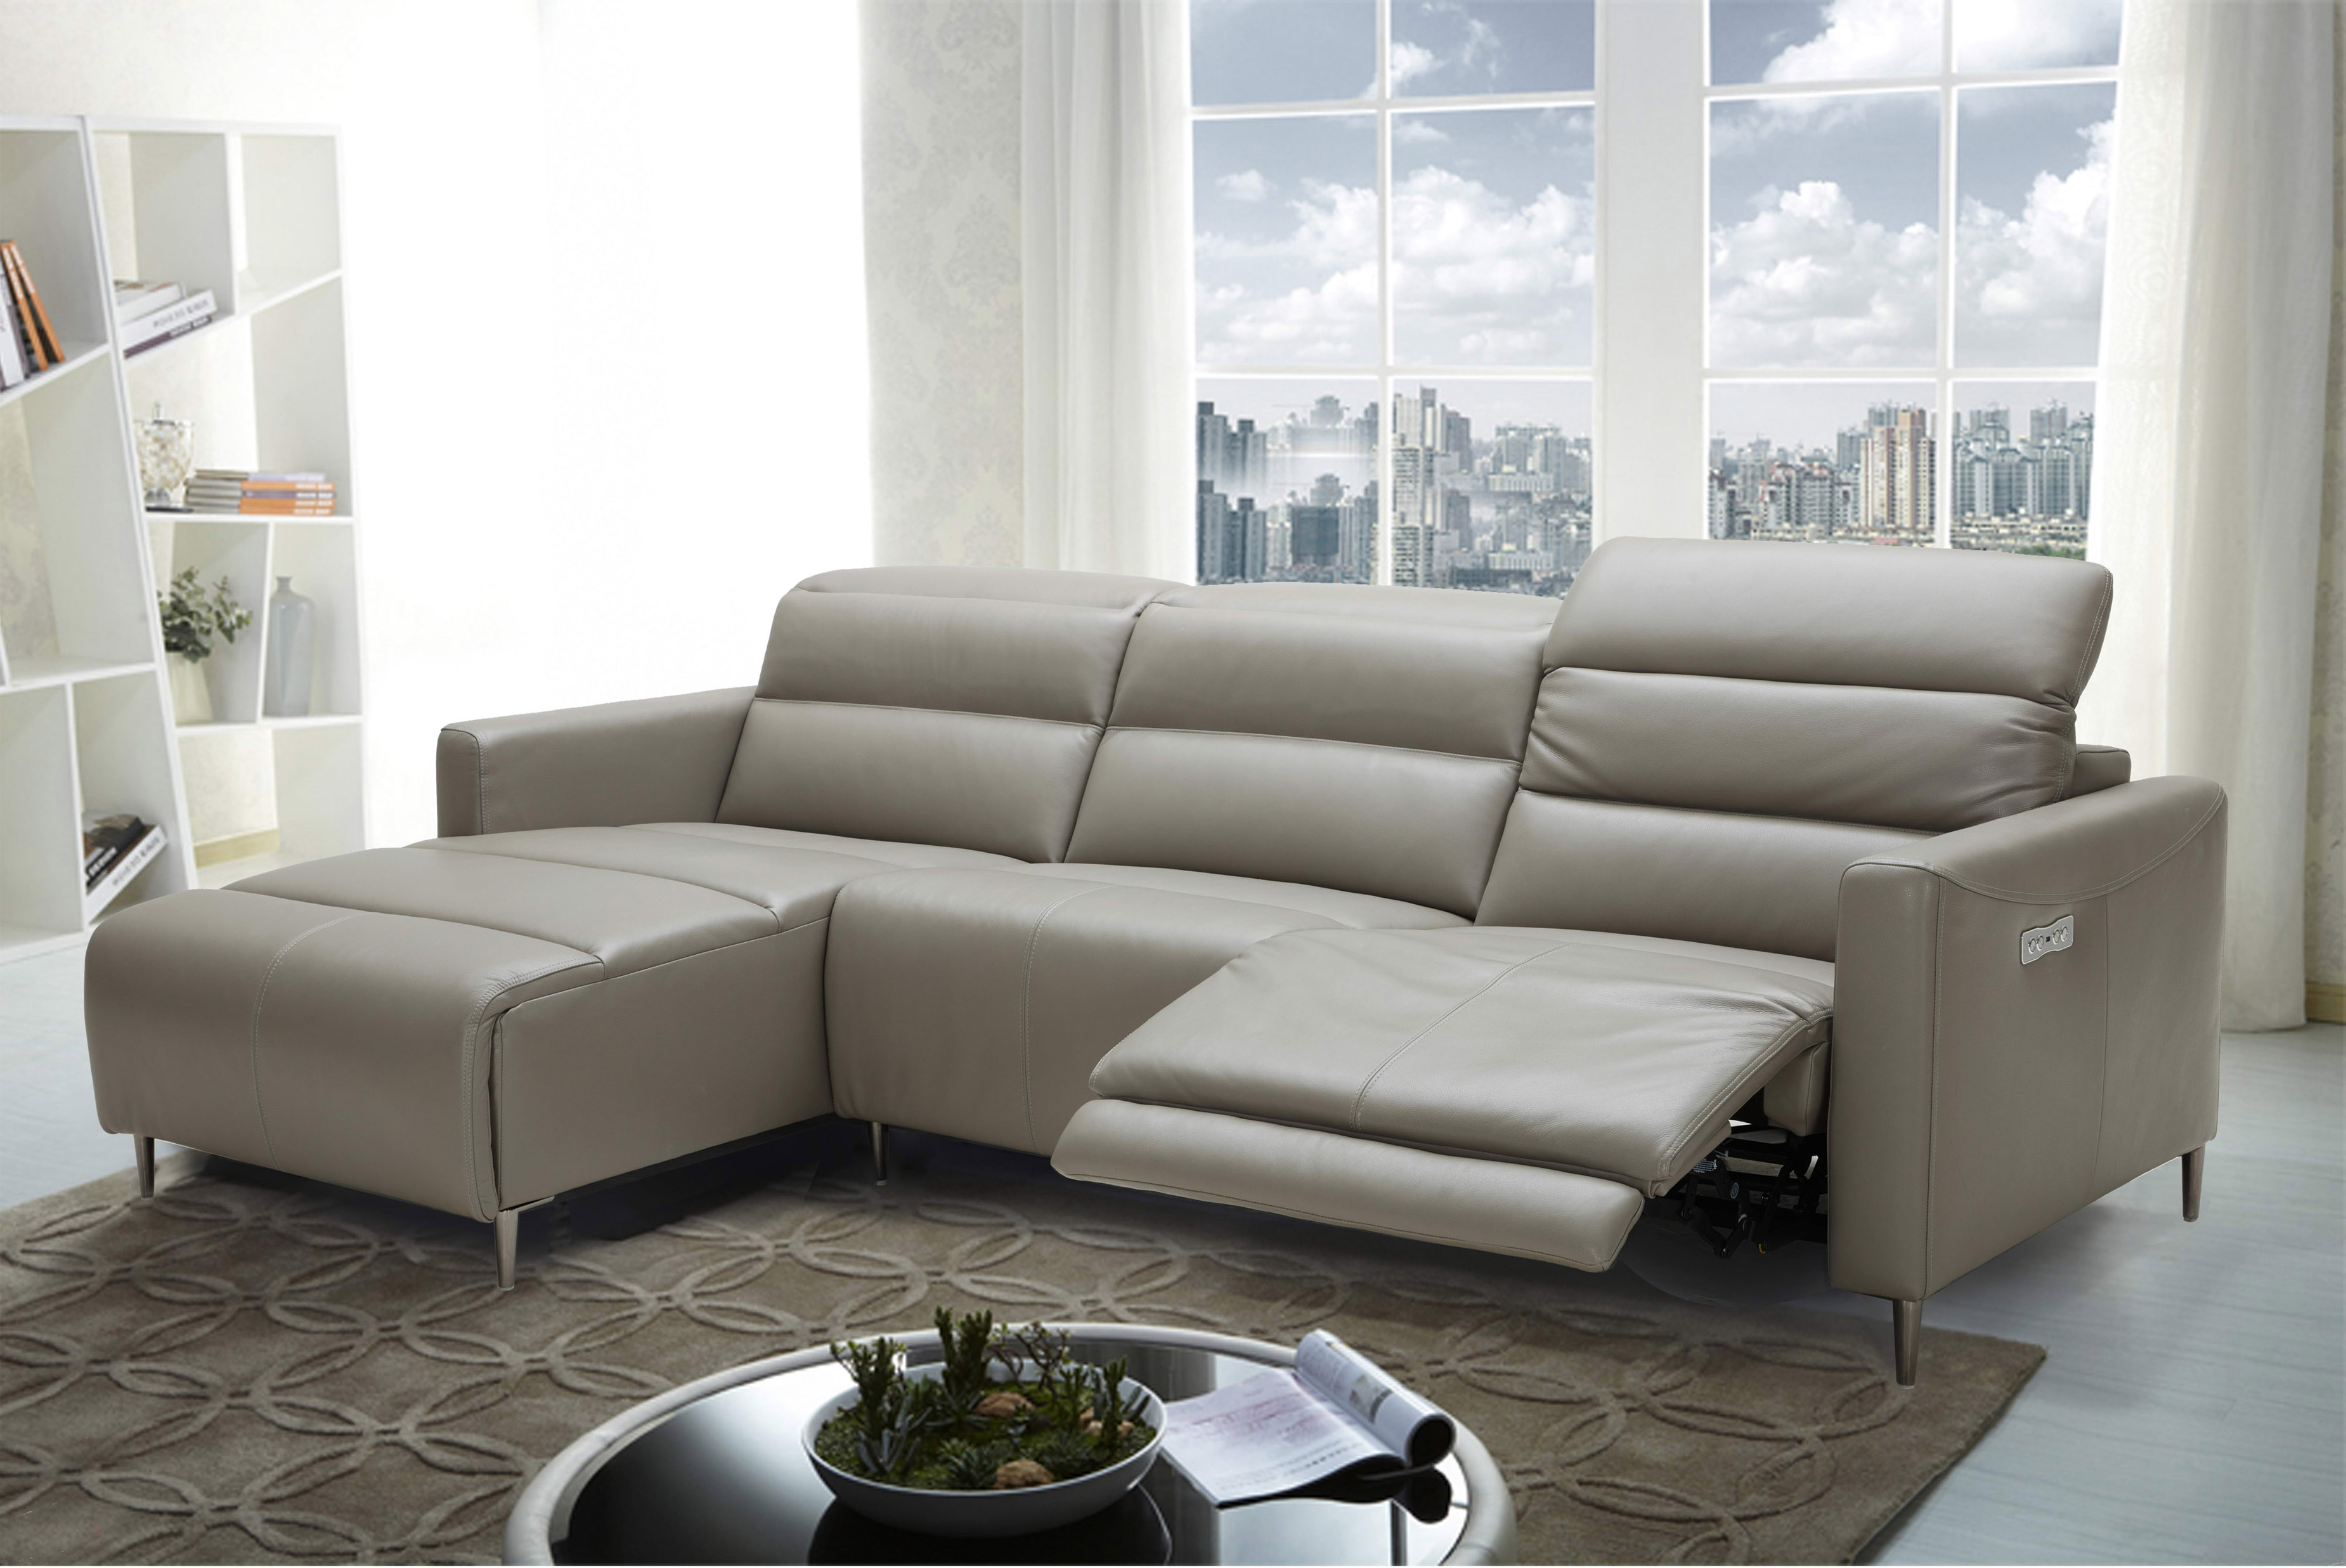 high quality leather living room furniture